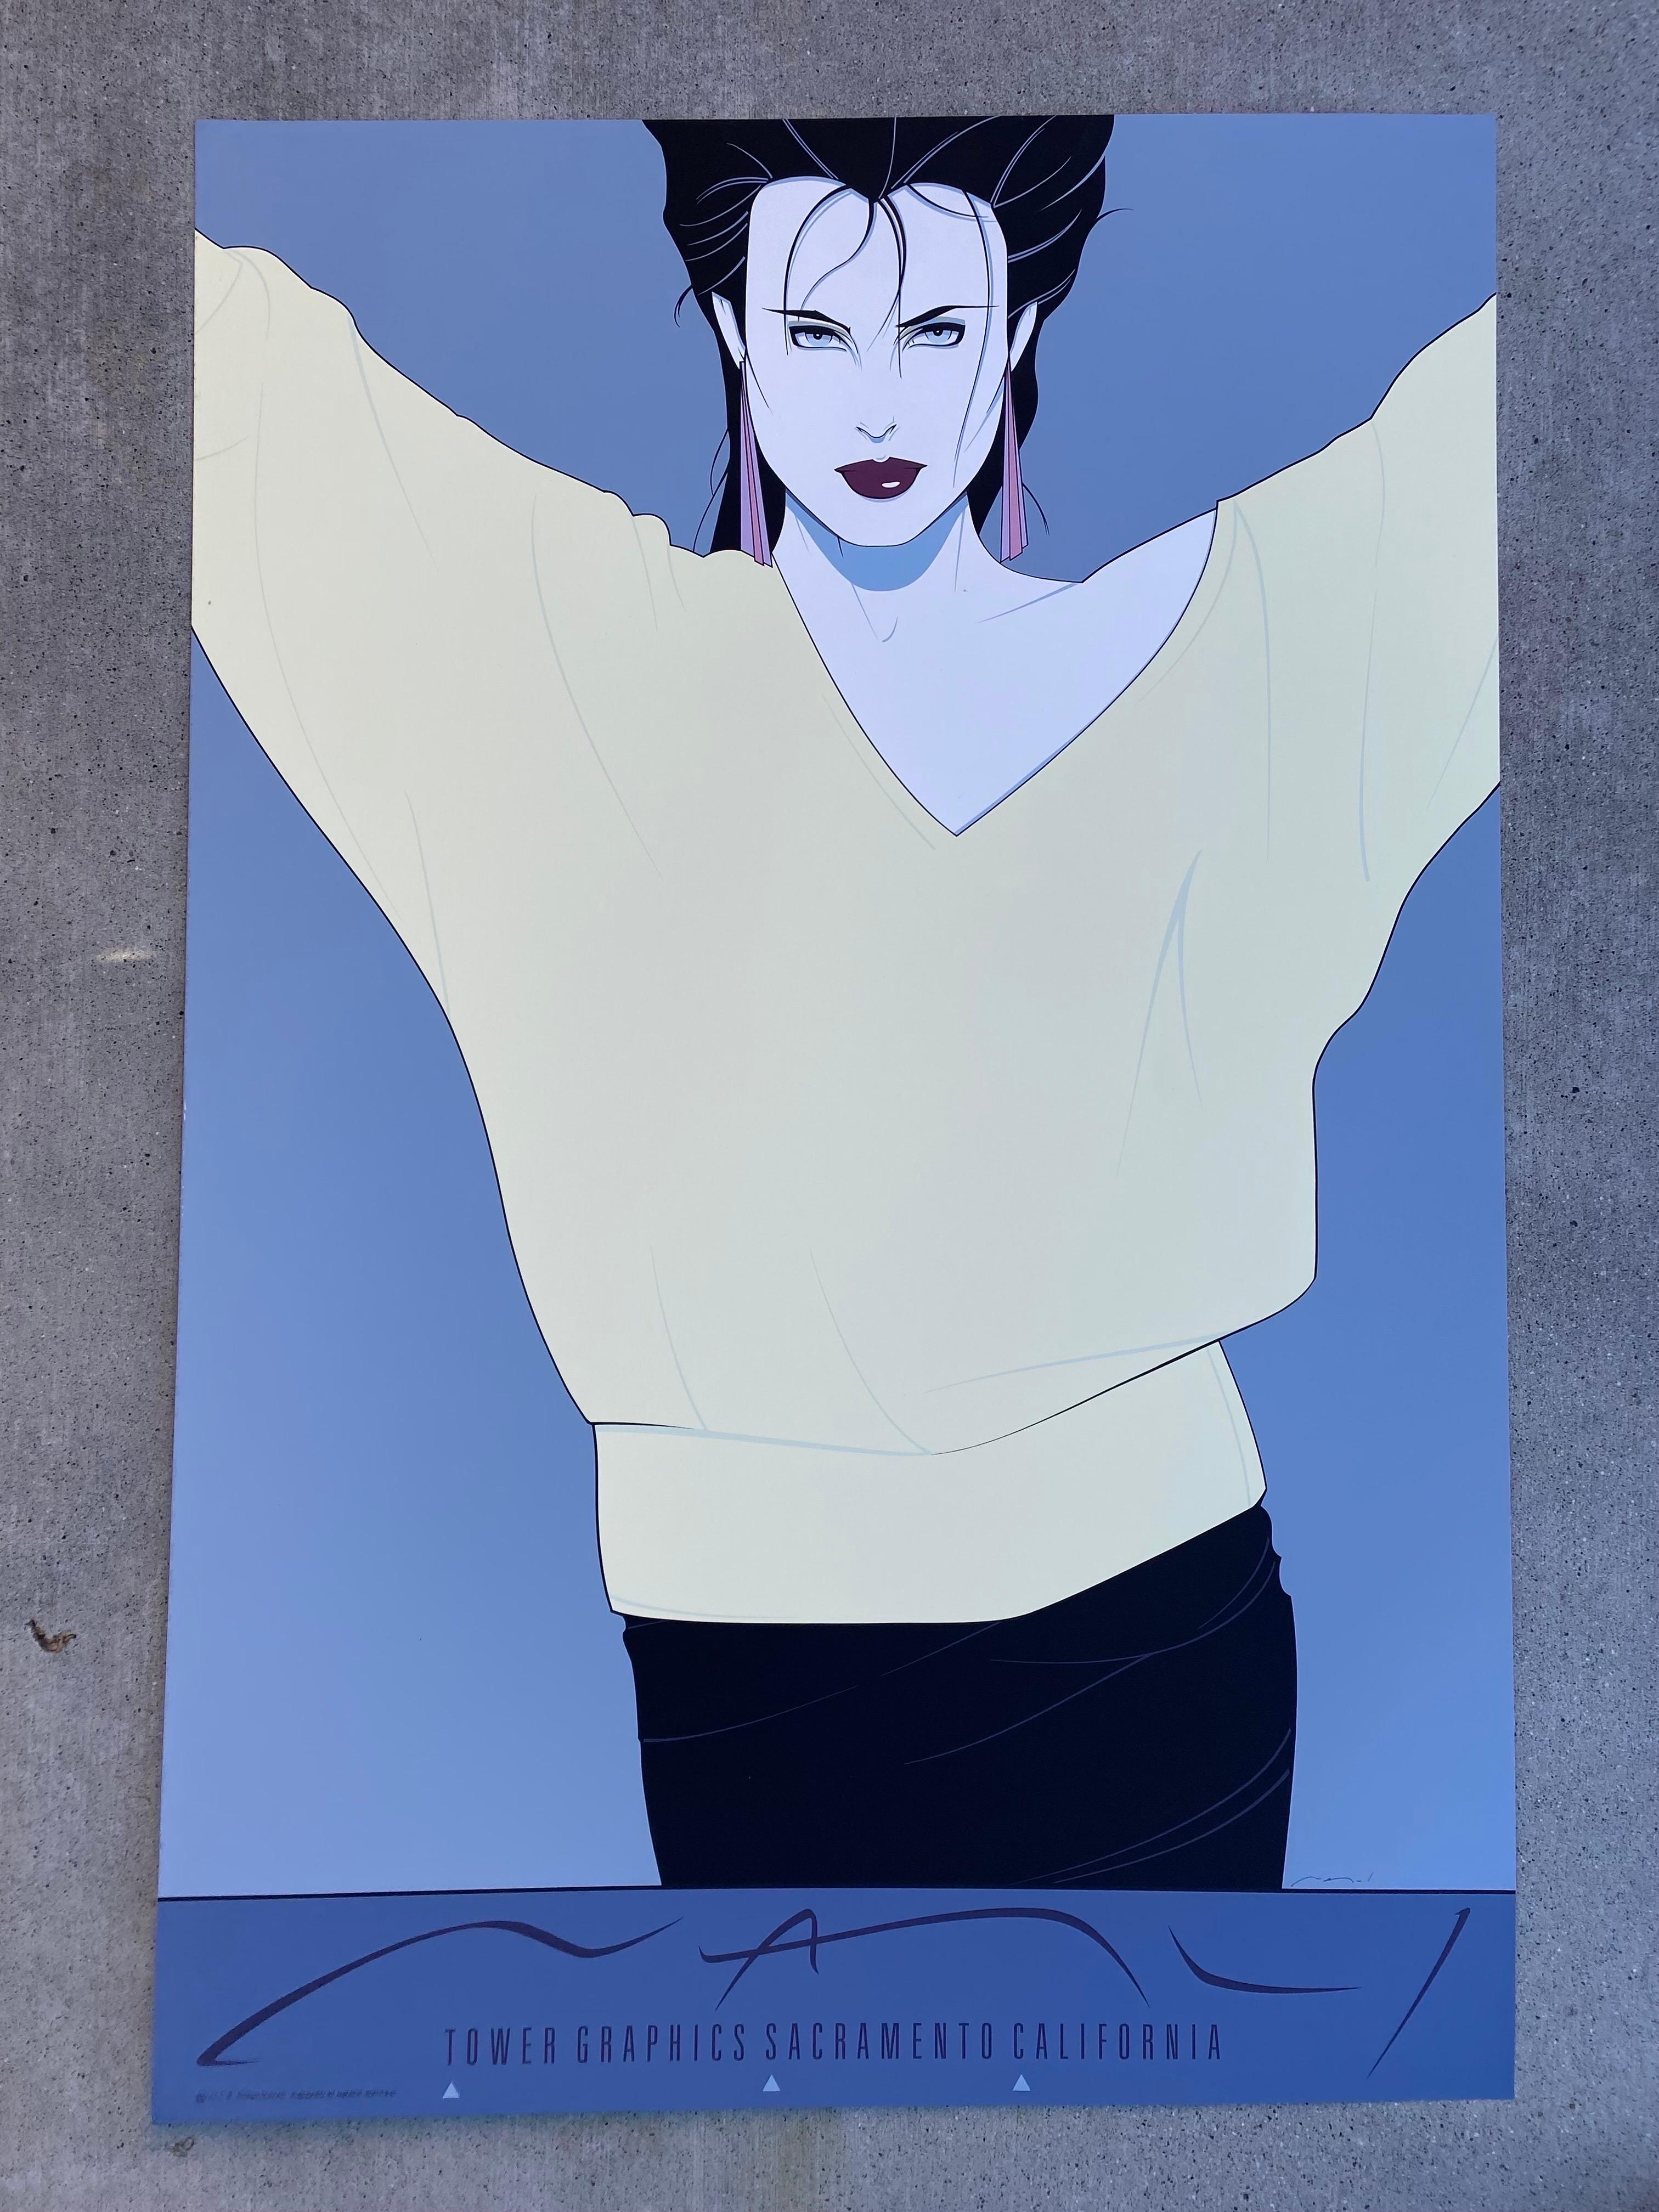 Great Patrick Nagel print of a 